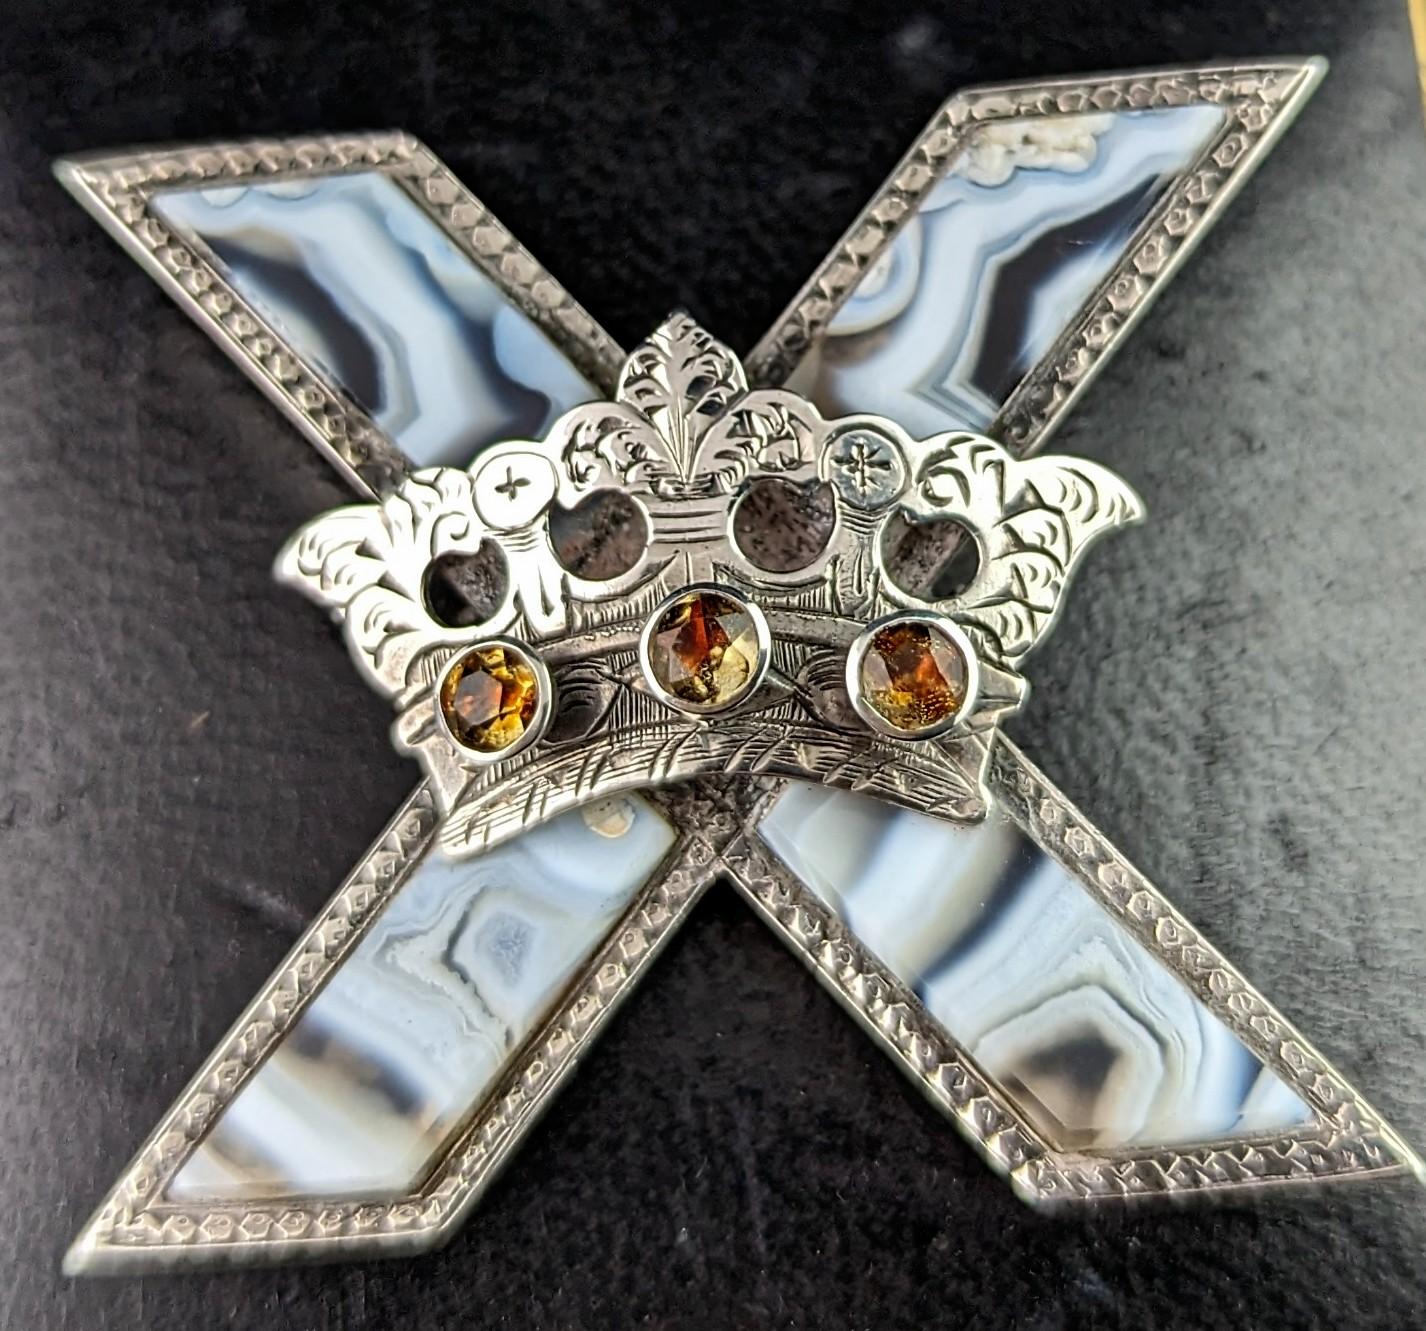 We love this unique antique, Victorian era Scottish agate and silver Saltire cross and crown brooch.

It has a large cross shape, based on the Saltire or St Andrews flag of Scotland with an applied silver crown, the crown is engraved and set with